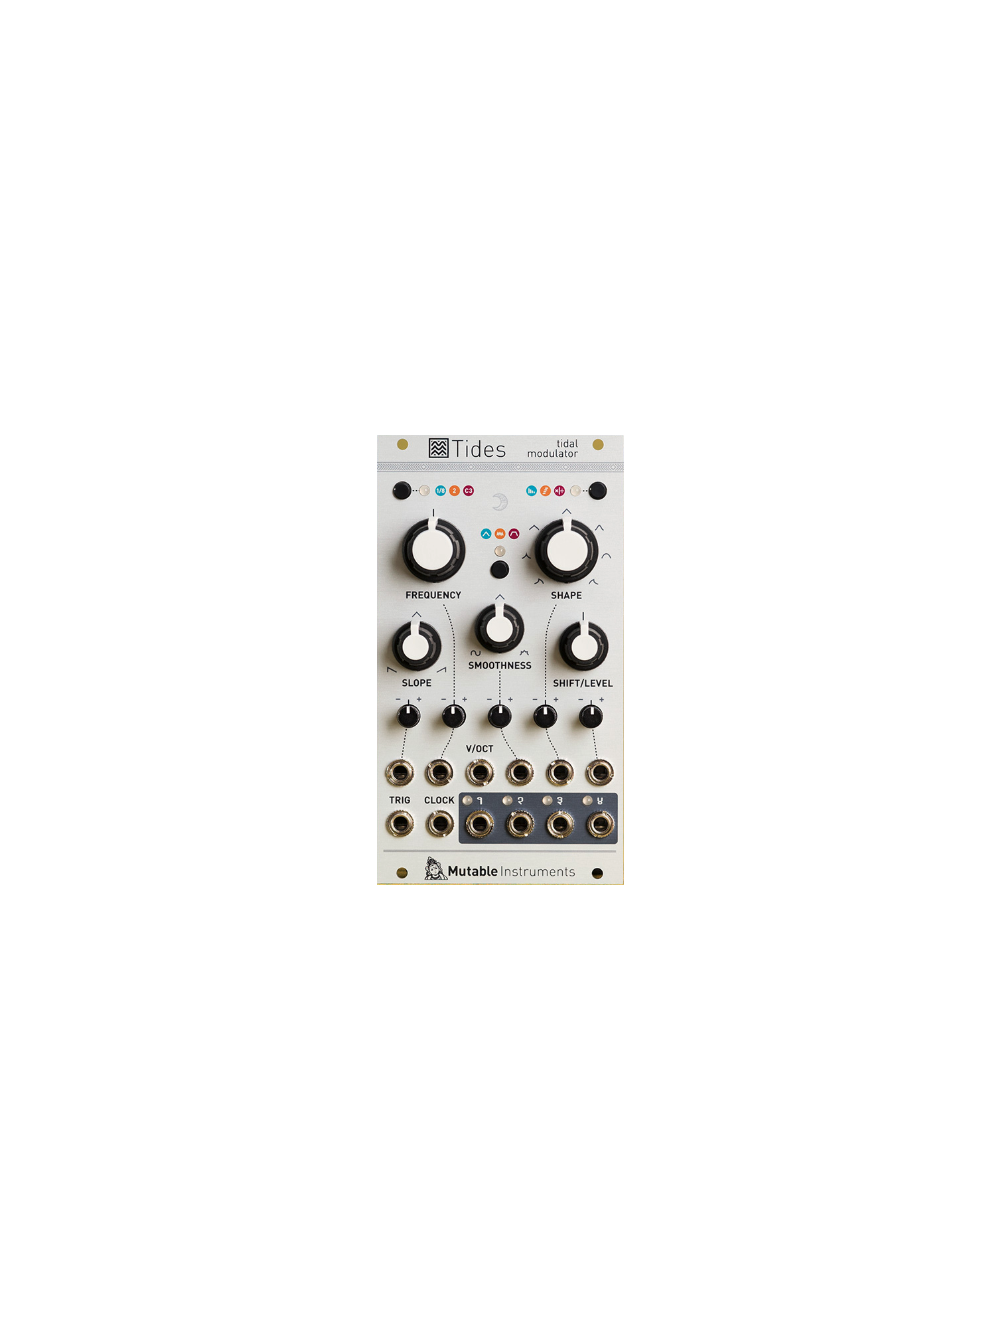 Mutable Instruments - Tides 2018